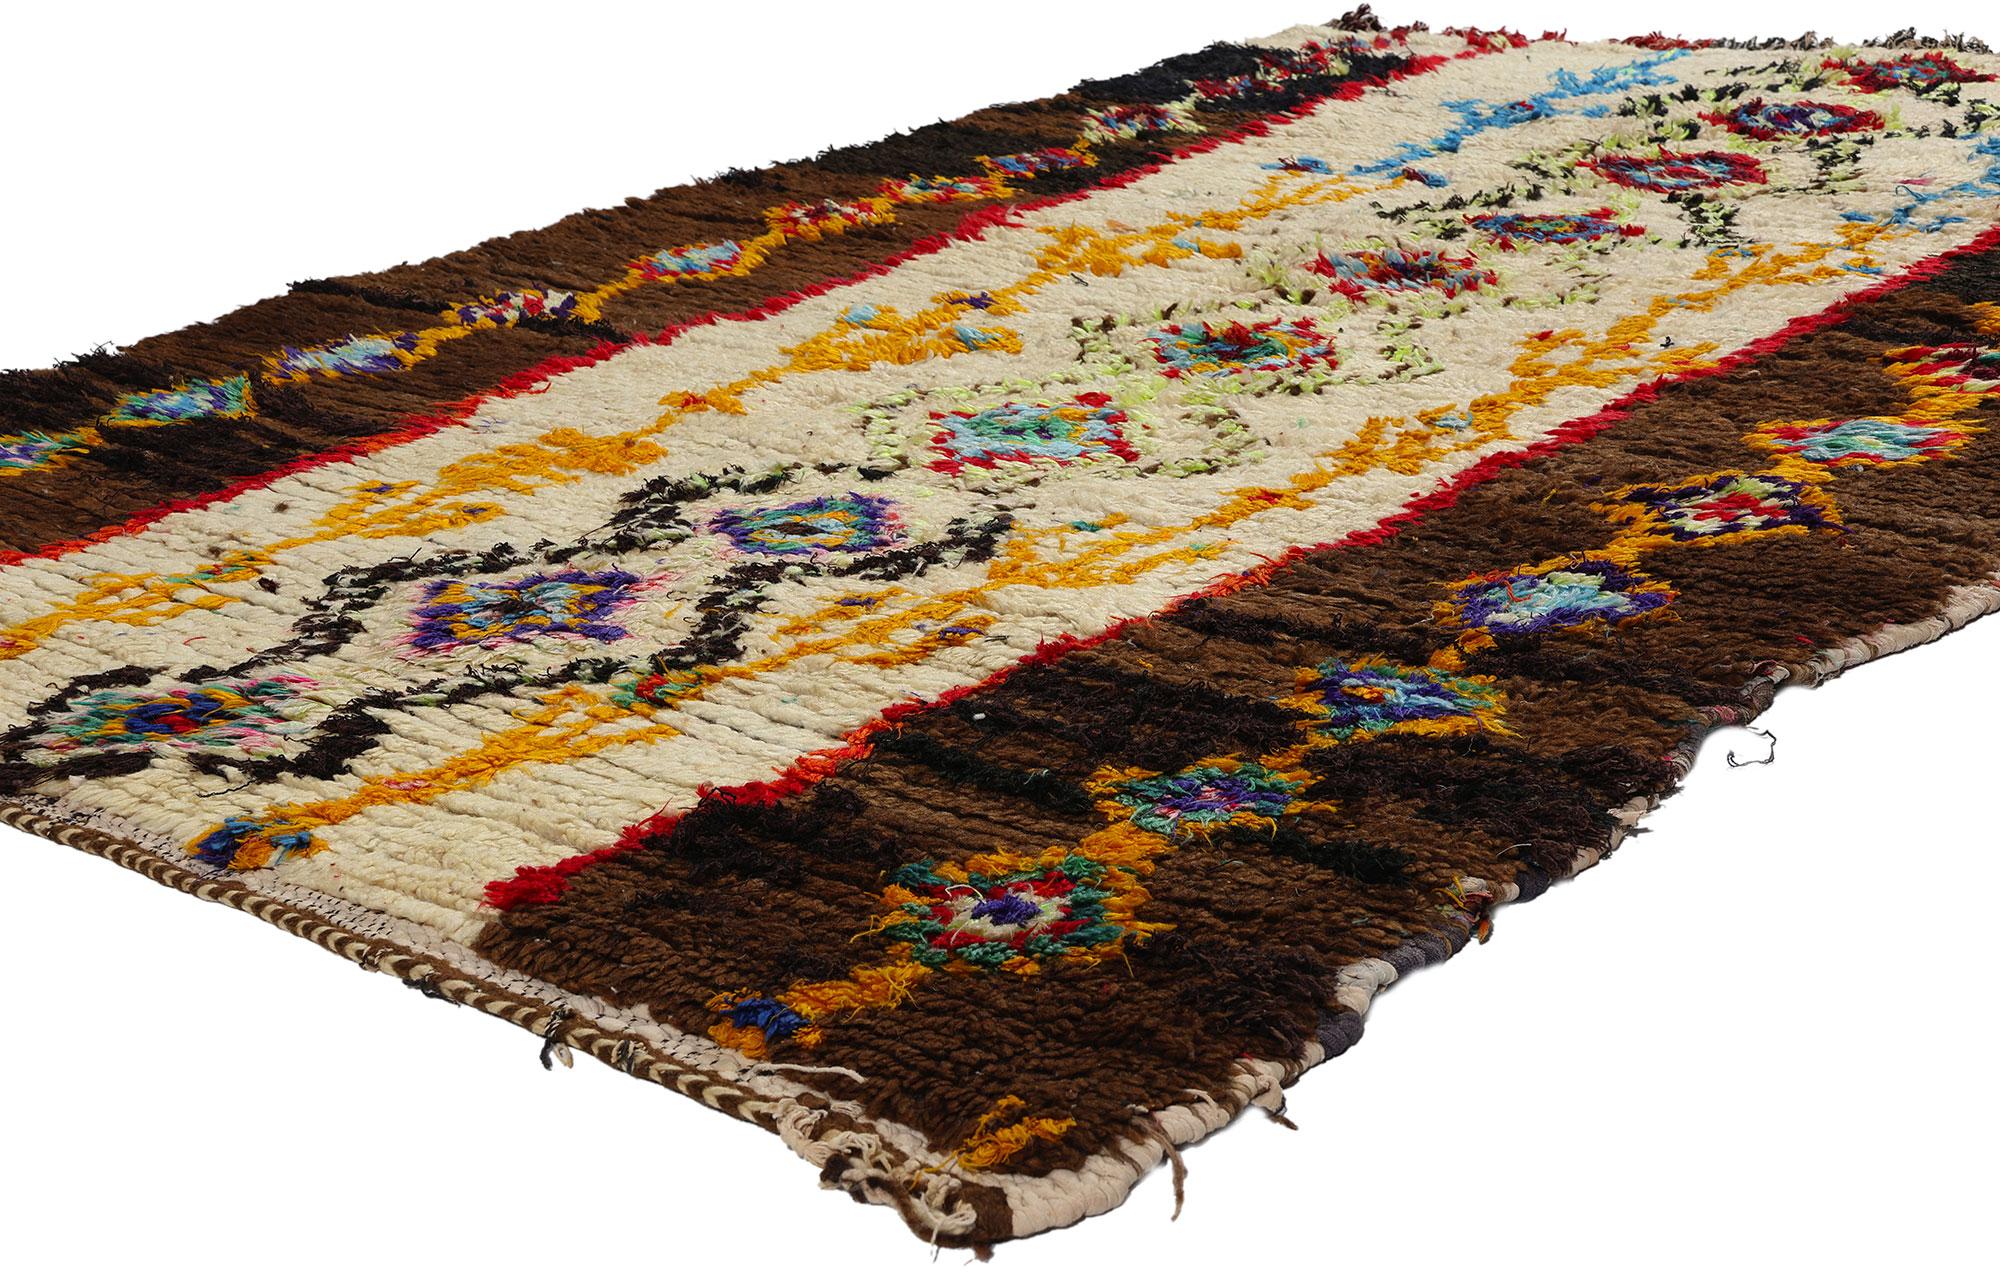 21810 Colorful Vintage Boucherouite Moroccan Azilal Rag Rug, 04'06 x 07'10. Azilal rag rugs, affectionately known as Azilal Boucherouite rugs, weave a tale of sustainable craftsmanship echoing from the heart of the Azilal region in the Atlas